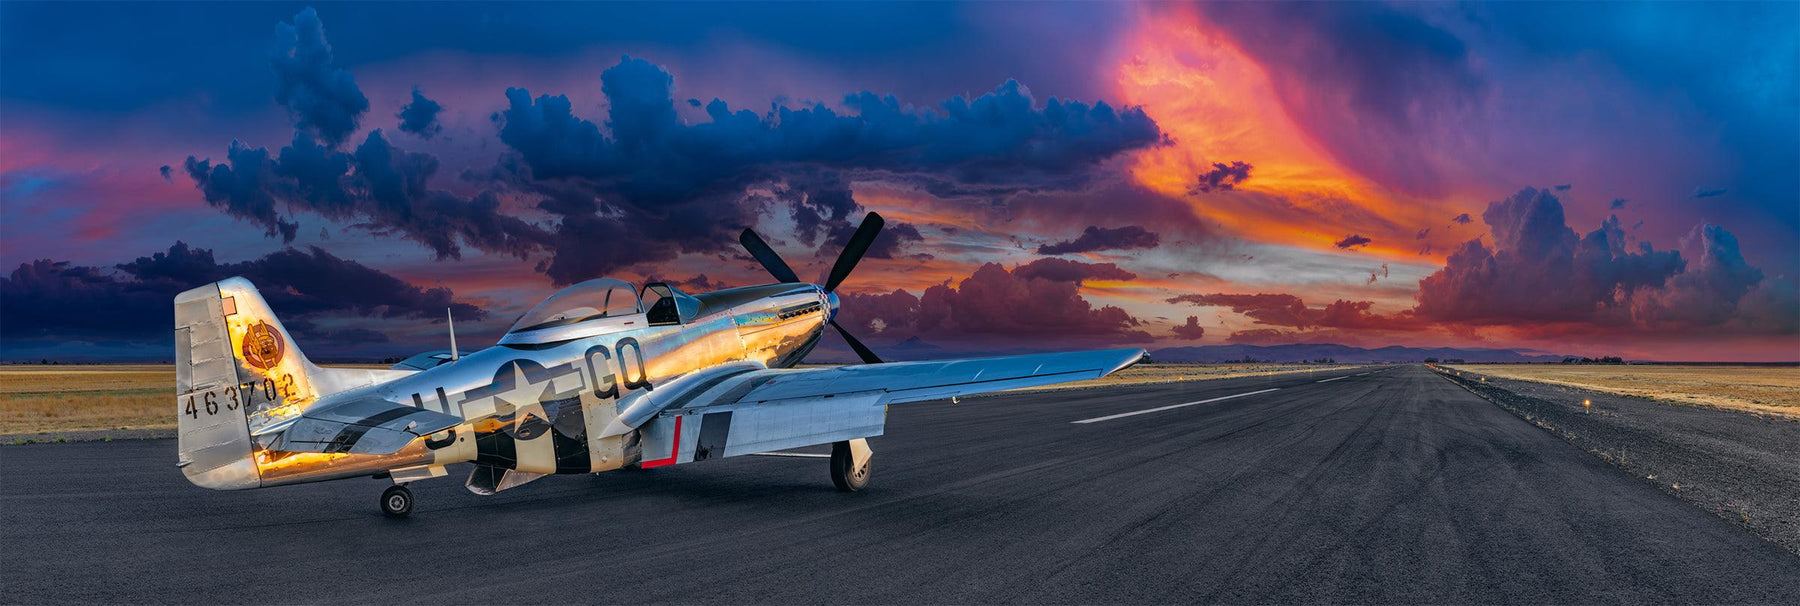 P51 Mustang airplane sitting on a runway in Aurora Oregon looking out at a cloud filled sky at sunset